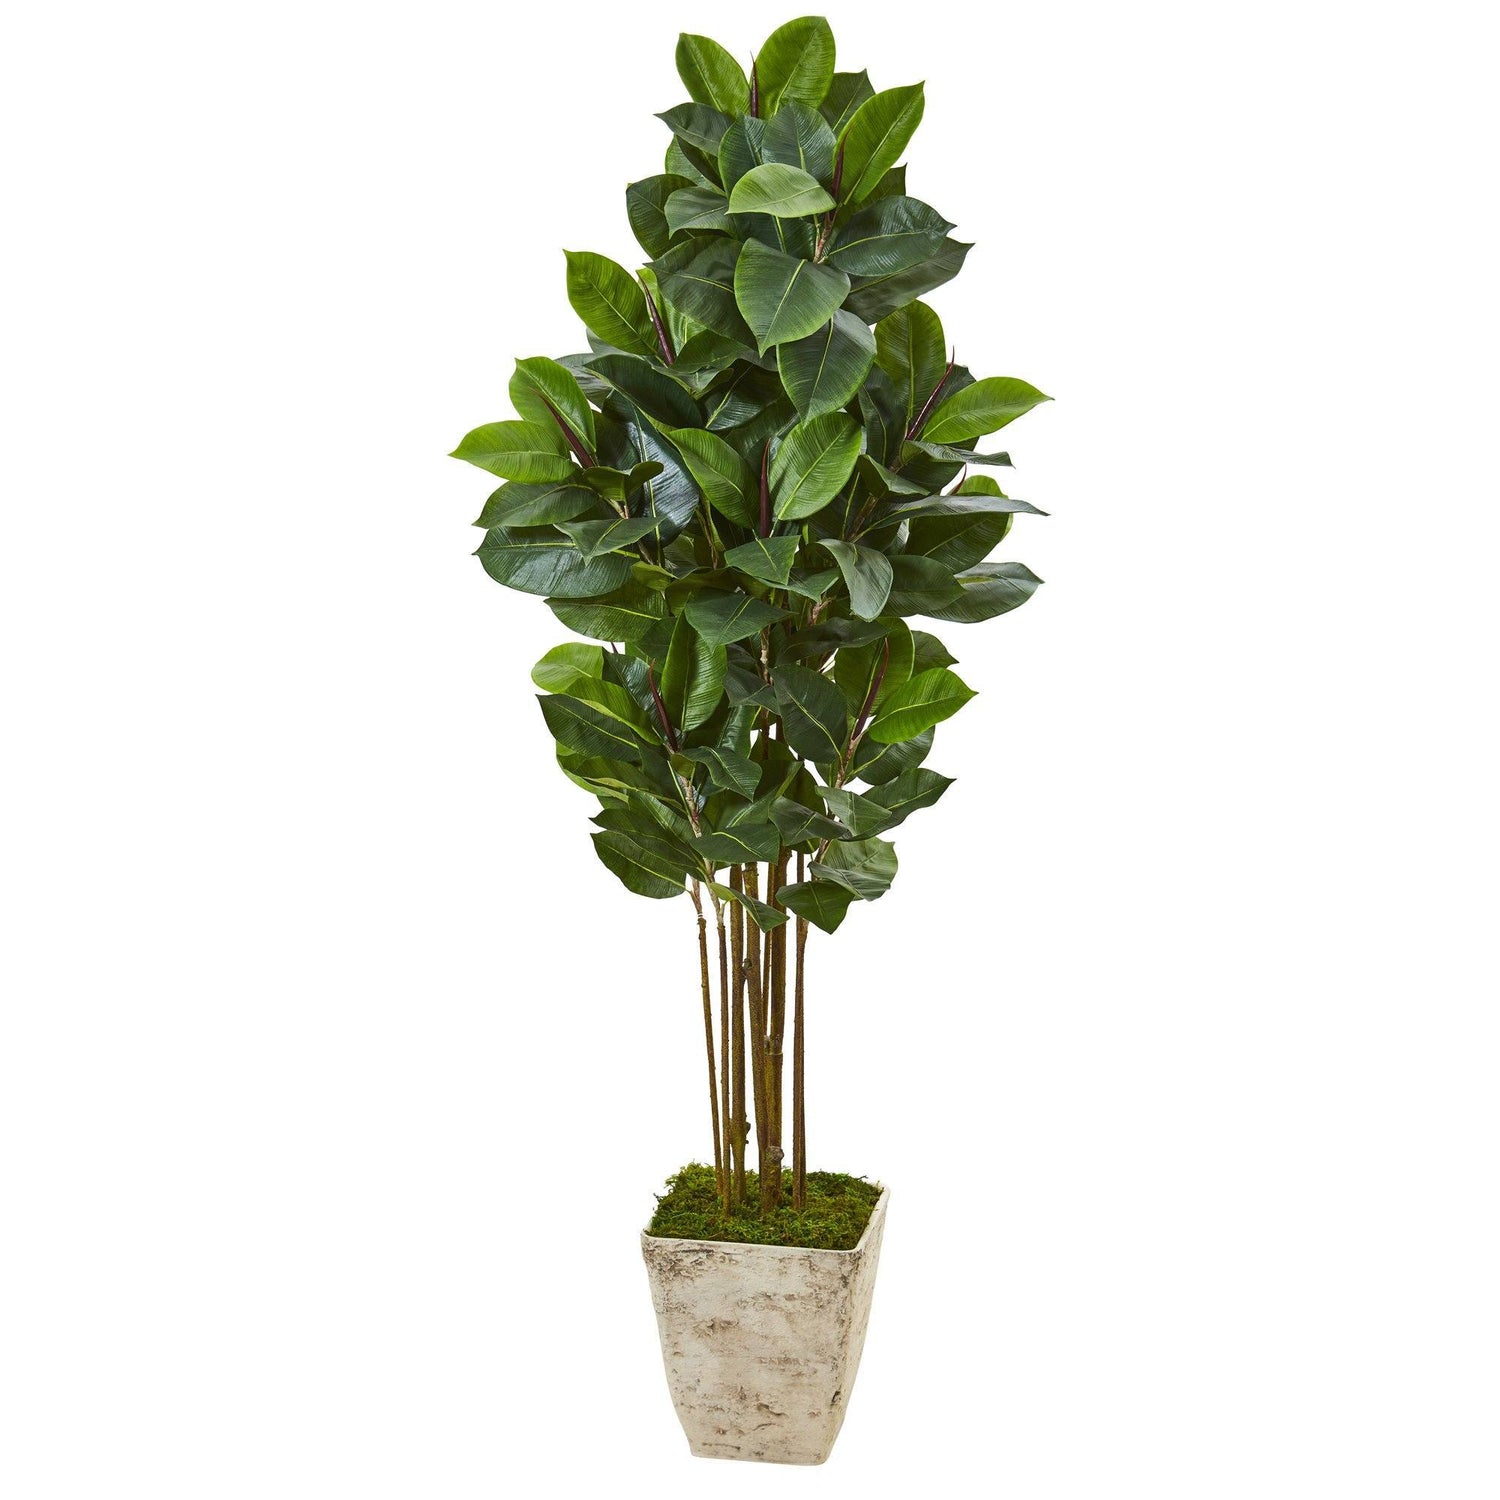 63” Rubber Leaf Artificial Tree in Country White Planter